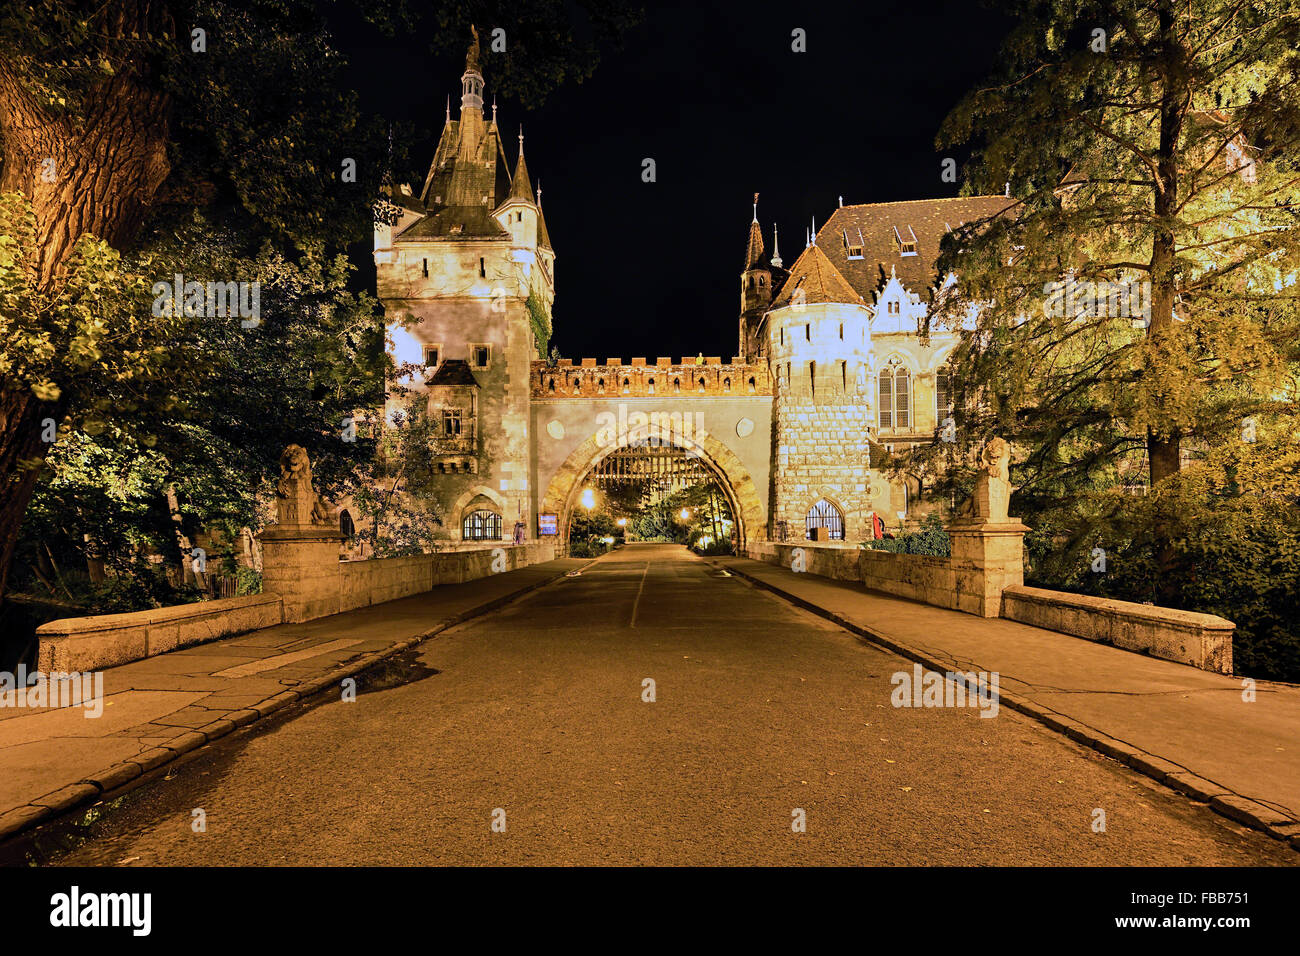 Low Angle View of a Castle Gate Lit Up at Night, Vajdahunyad Castle, Budapest, Hungary Stock Photo